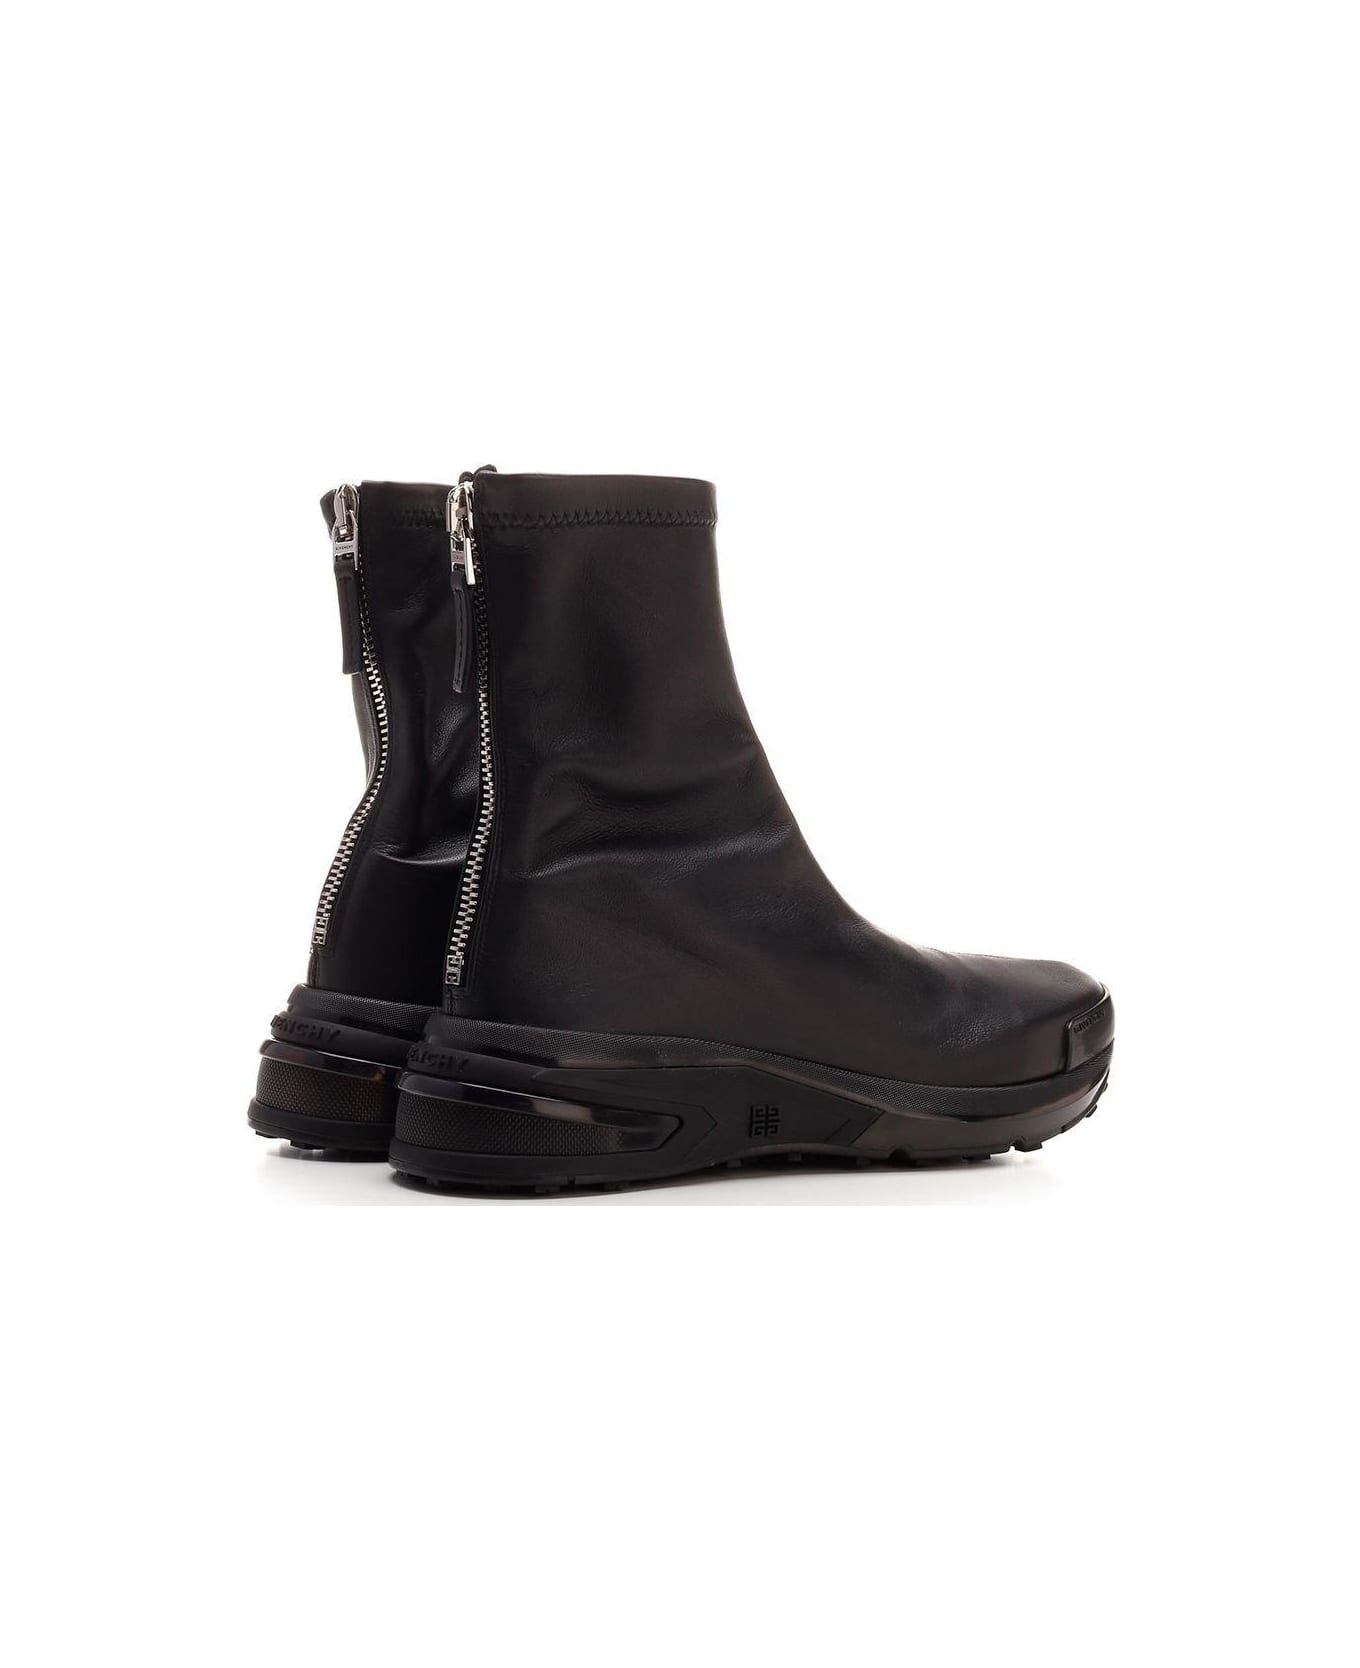 Givenchy Giv 1 Sock Sneakers - BLACK ブーツ